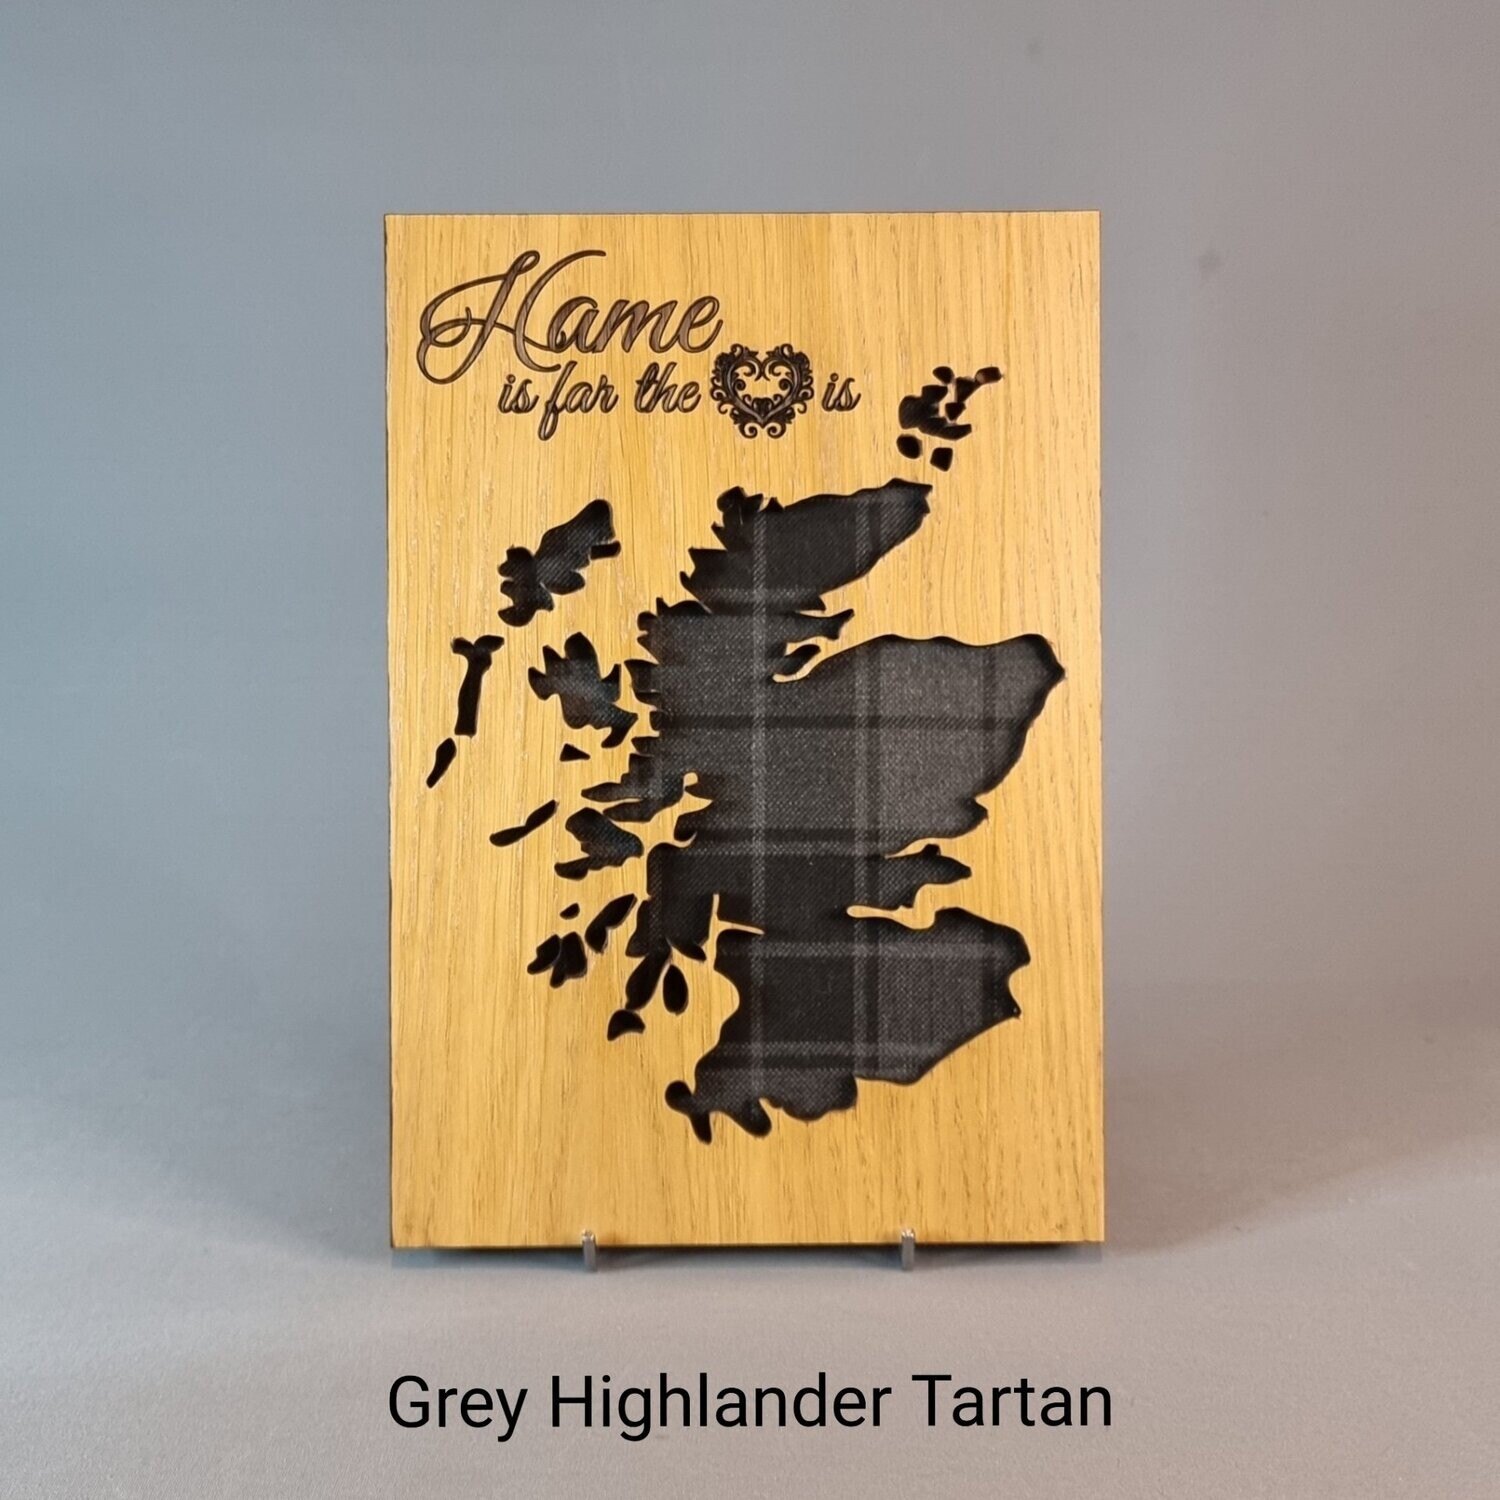 Scotland Map Oak Frame With Tartan & "Hame is far the heart is" Quote